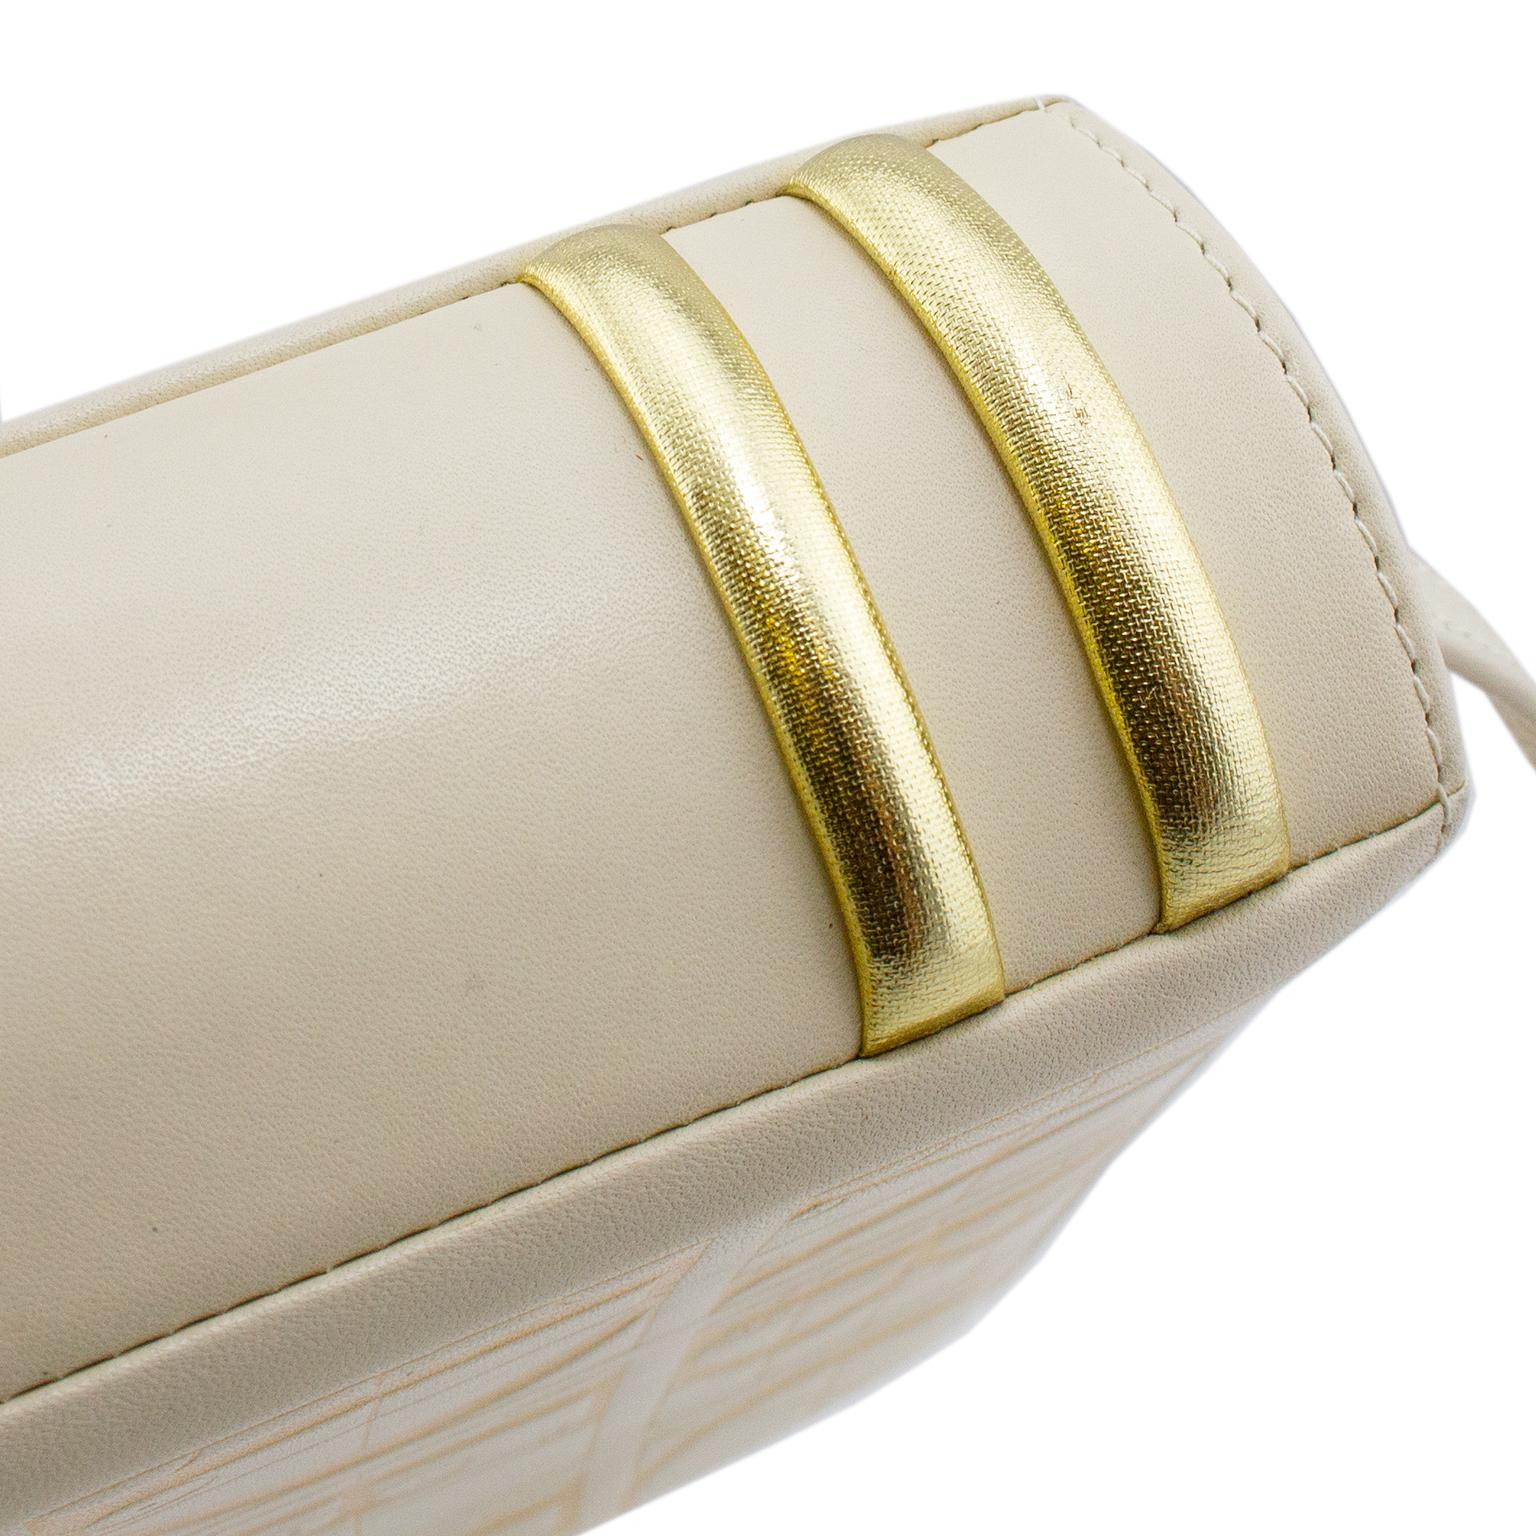 1980s Paloma Picasso Cream and Gold Leather Book Bag In Good Condition For Sale In Toronto, Ontario